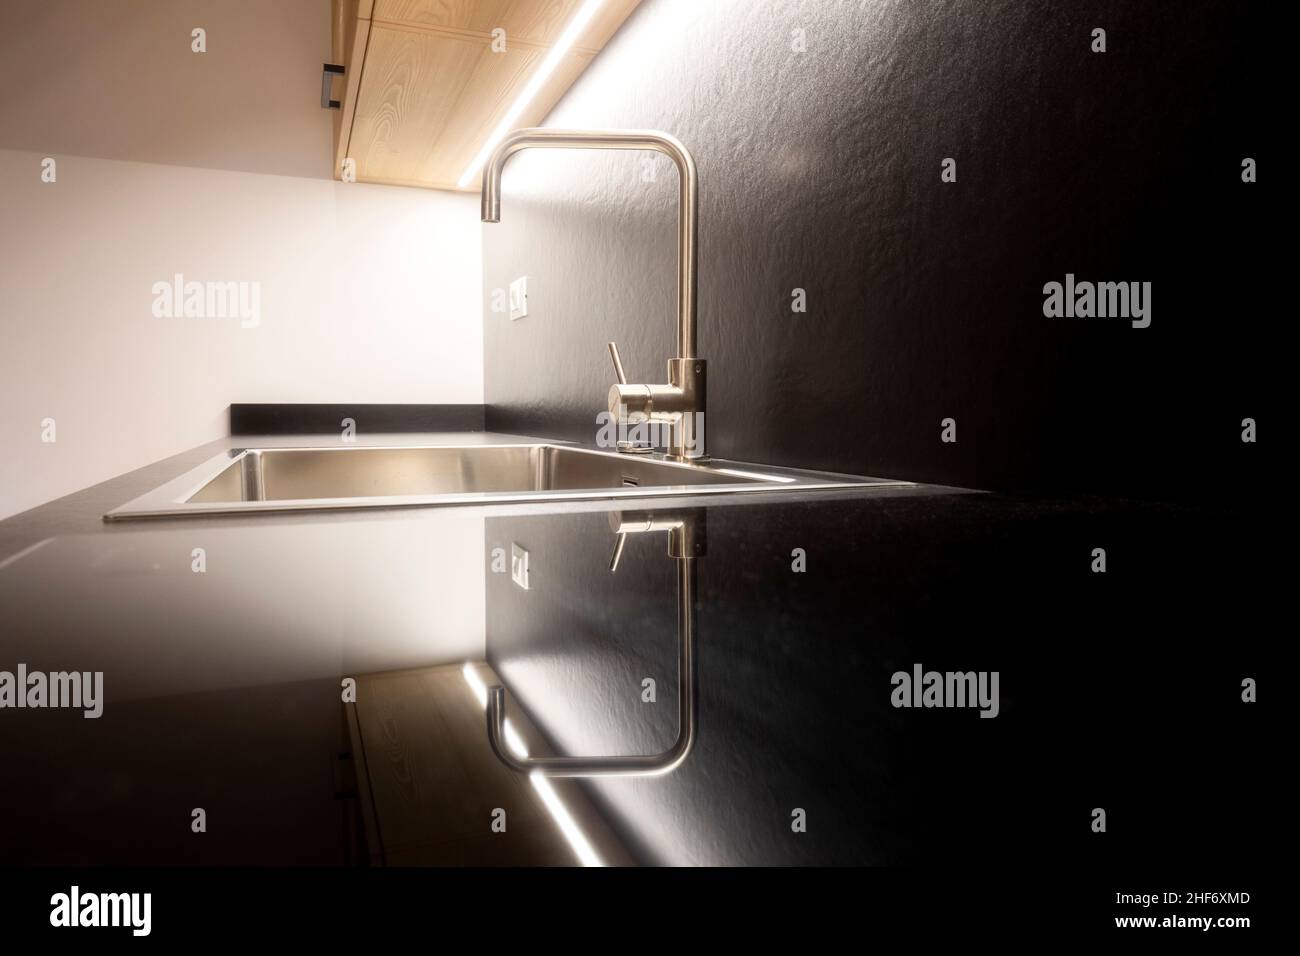 Modern furniture,  sink with steel faucet,  kitchen Stock Photo